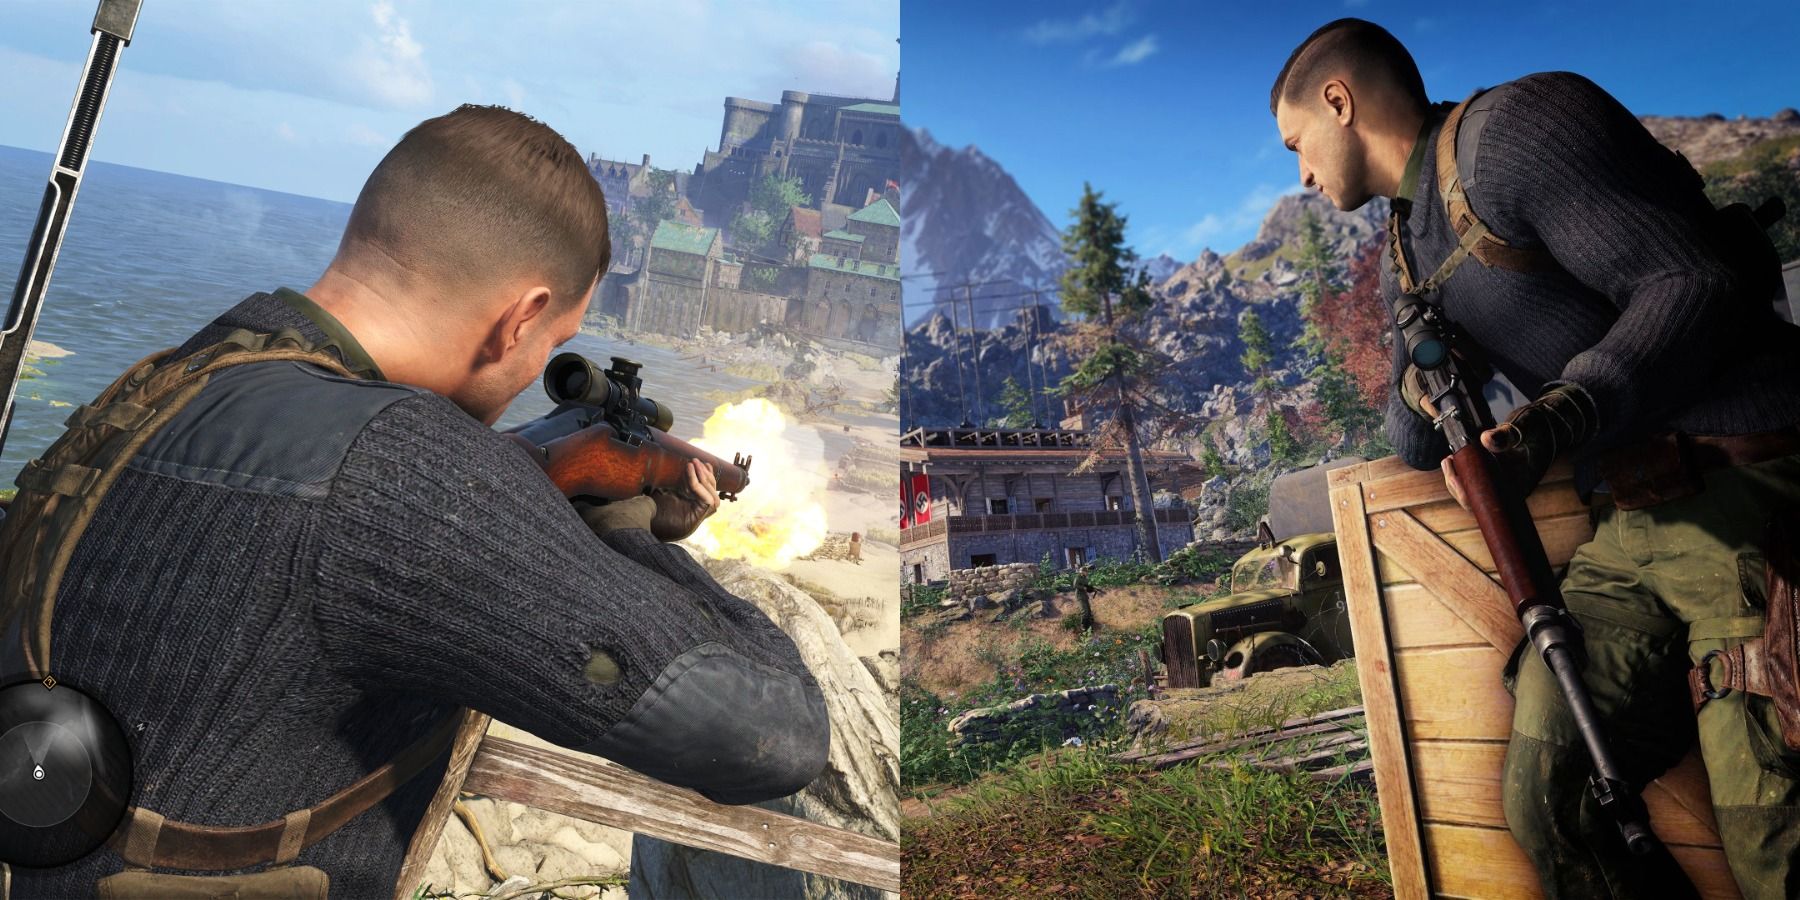 Sniper Elite 5 looking down barrel and taking aim and peering out